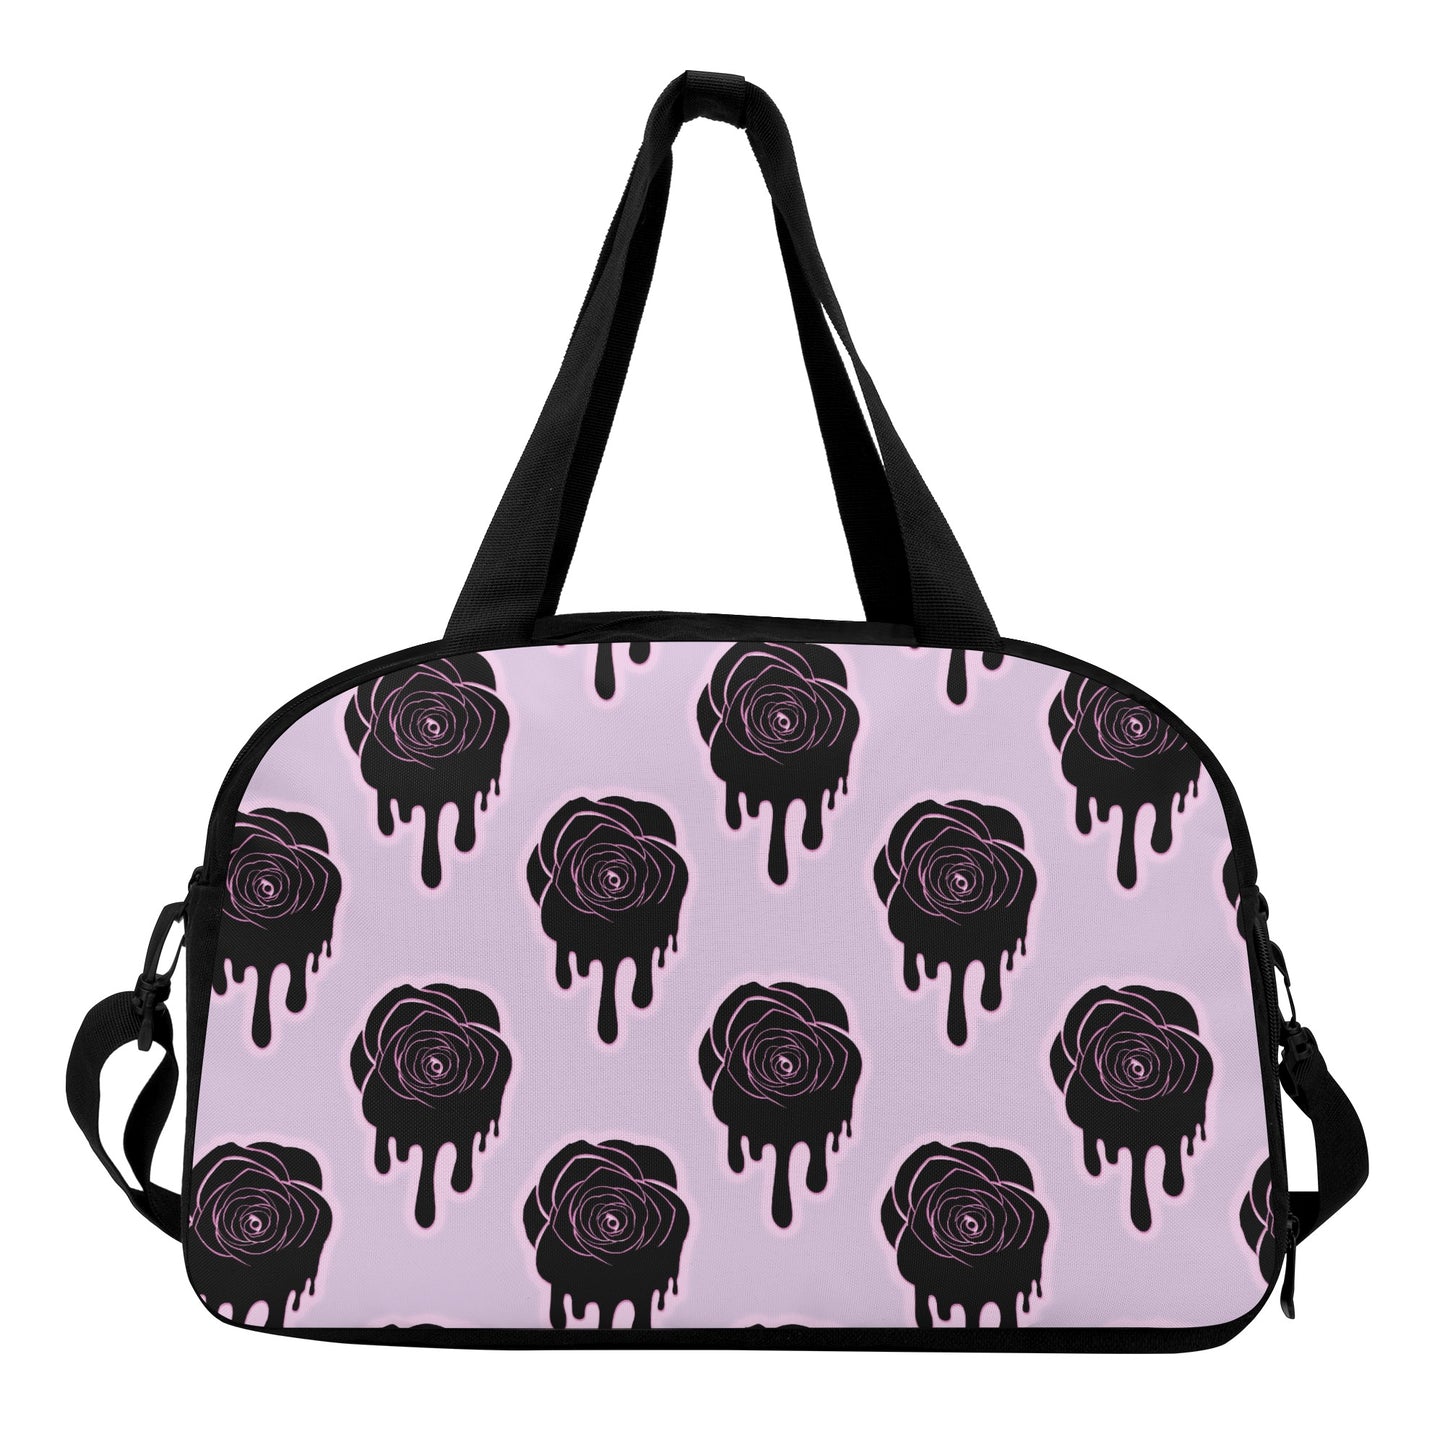 Dripping Black Roses Travel Luggage Bag